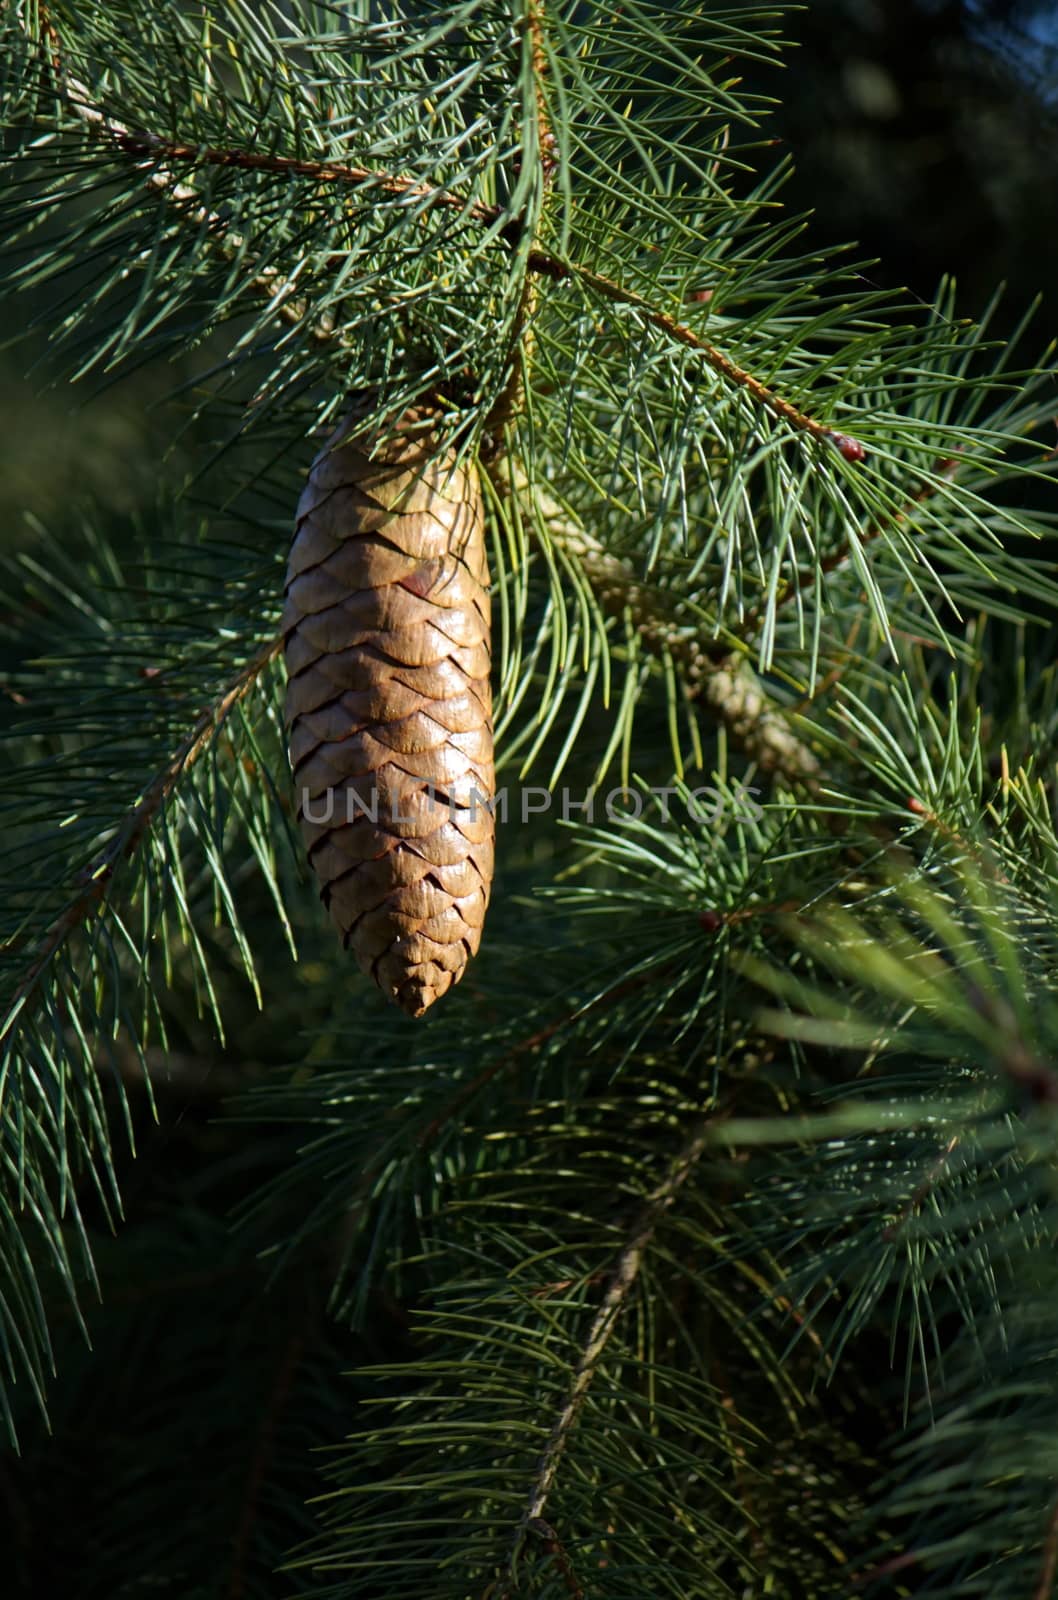 West himalayan or Morinda spruce (picea smithiana) close up on a cone